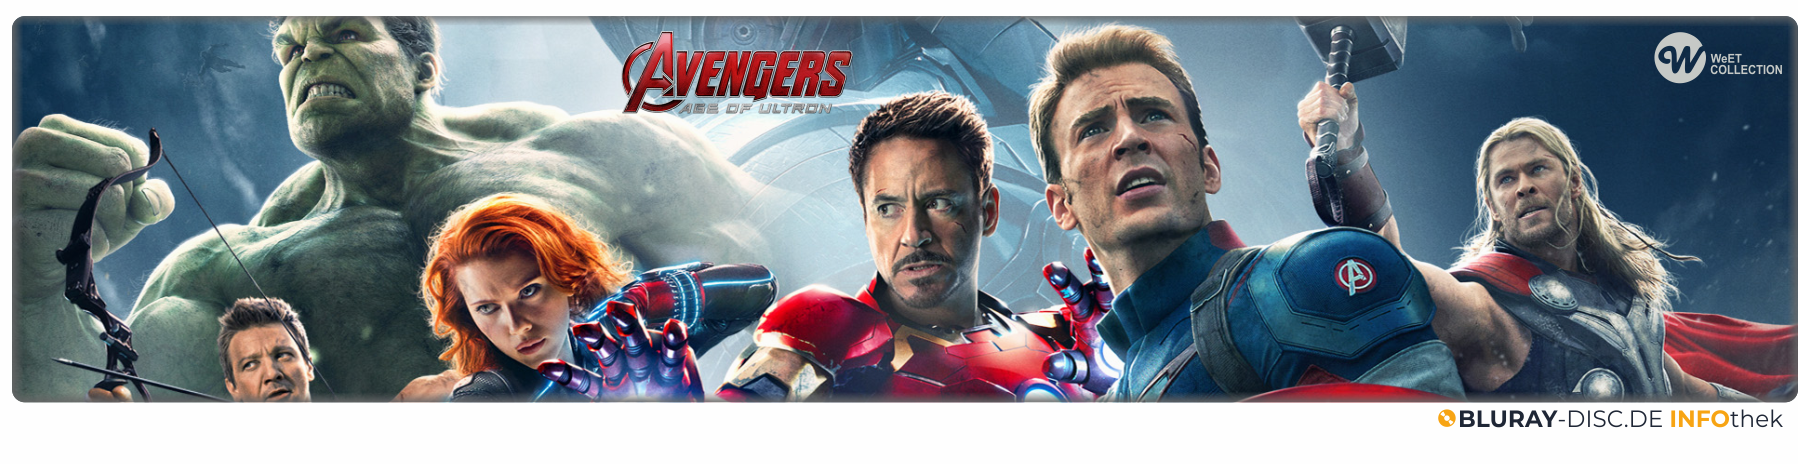 Moviebanner_WeET_Avengers_Age_of_Ultron.png